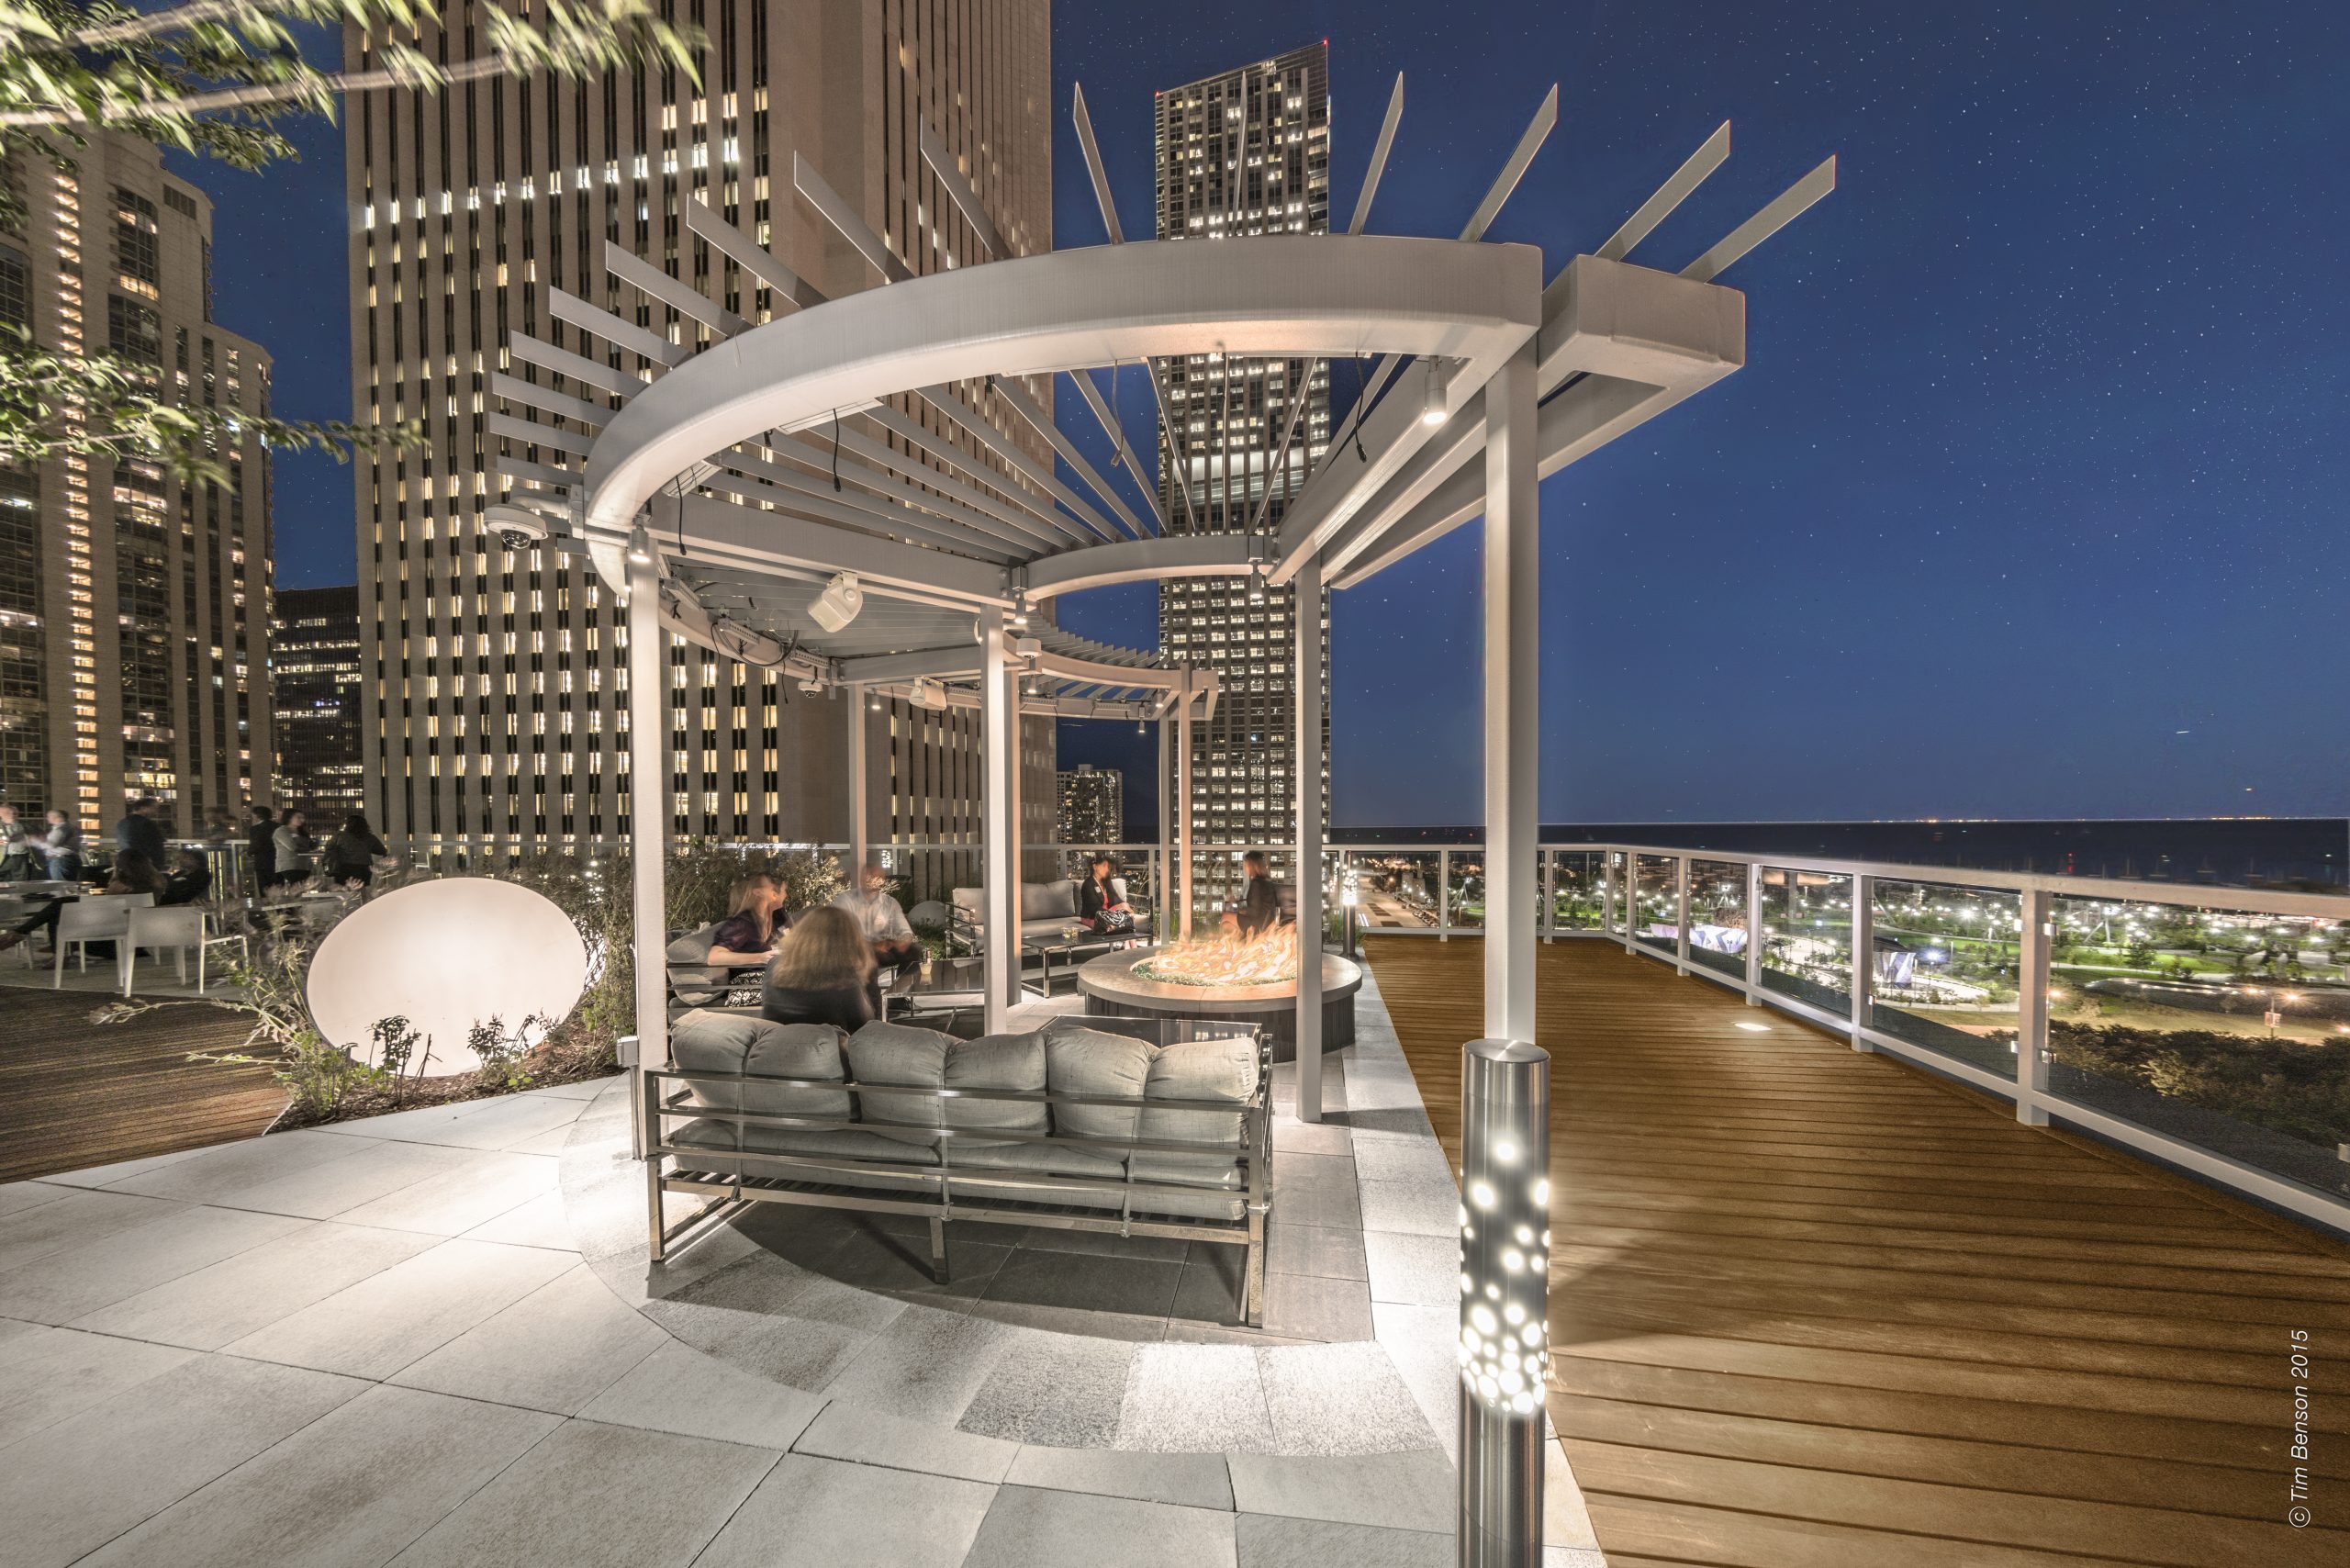 The Prudential Plaza boasts a modern aesthetic with an open-concept pergola, couch seating, a fire pit and large light grey Unilock slabs.